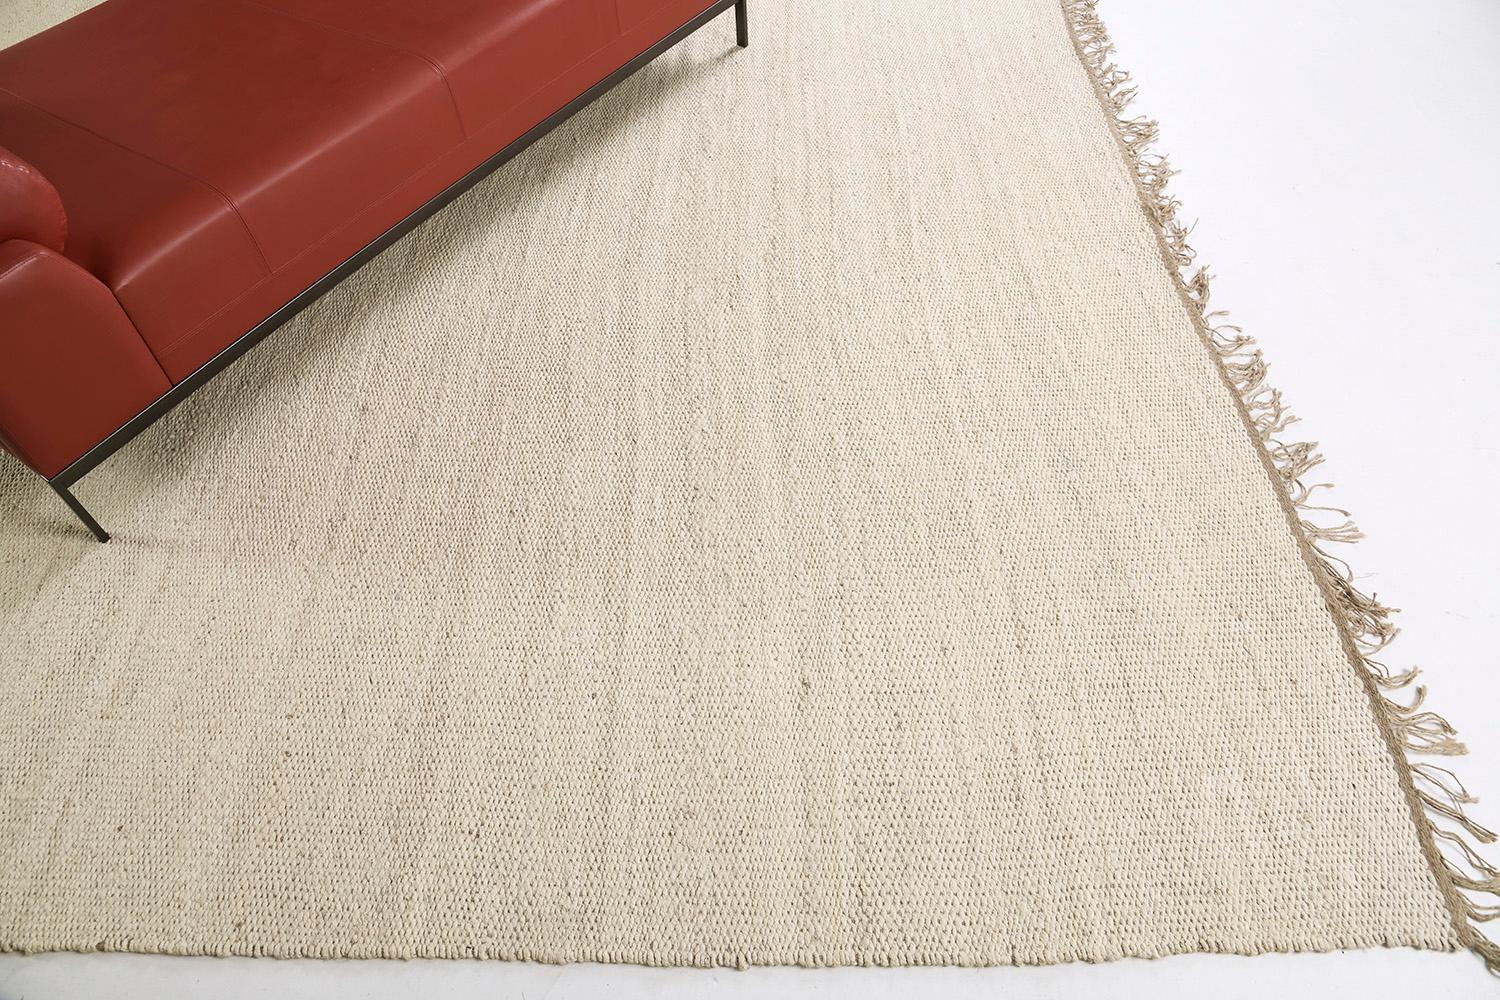 A solid design flatweave features horizontal strokes of gold-tone hemp. Embedded with beautiful tassels that match the simplicity yet a sophisticated kind of masterpiece. This decor will add harmonies to your modern interior and lift the mood of